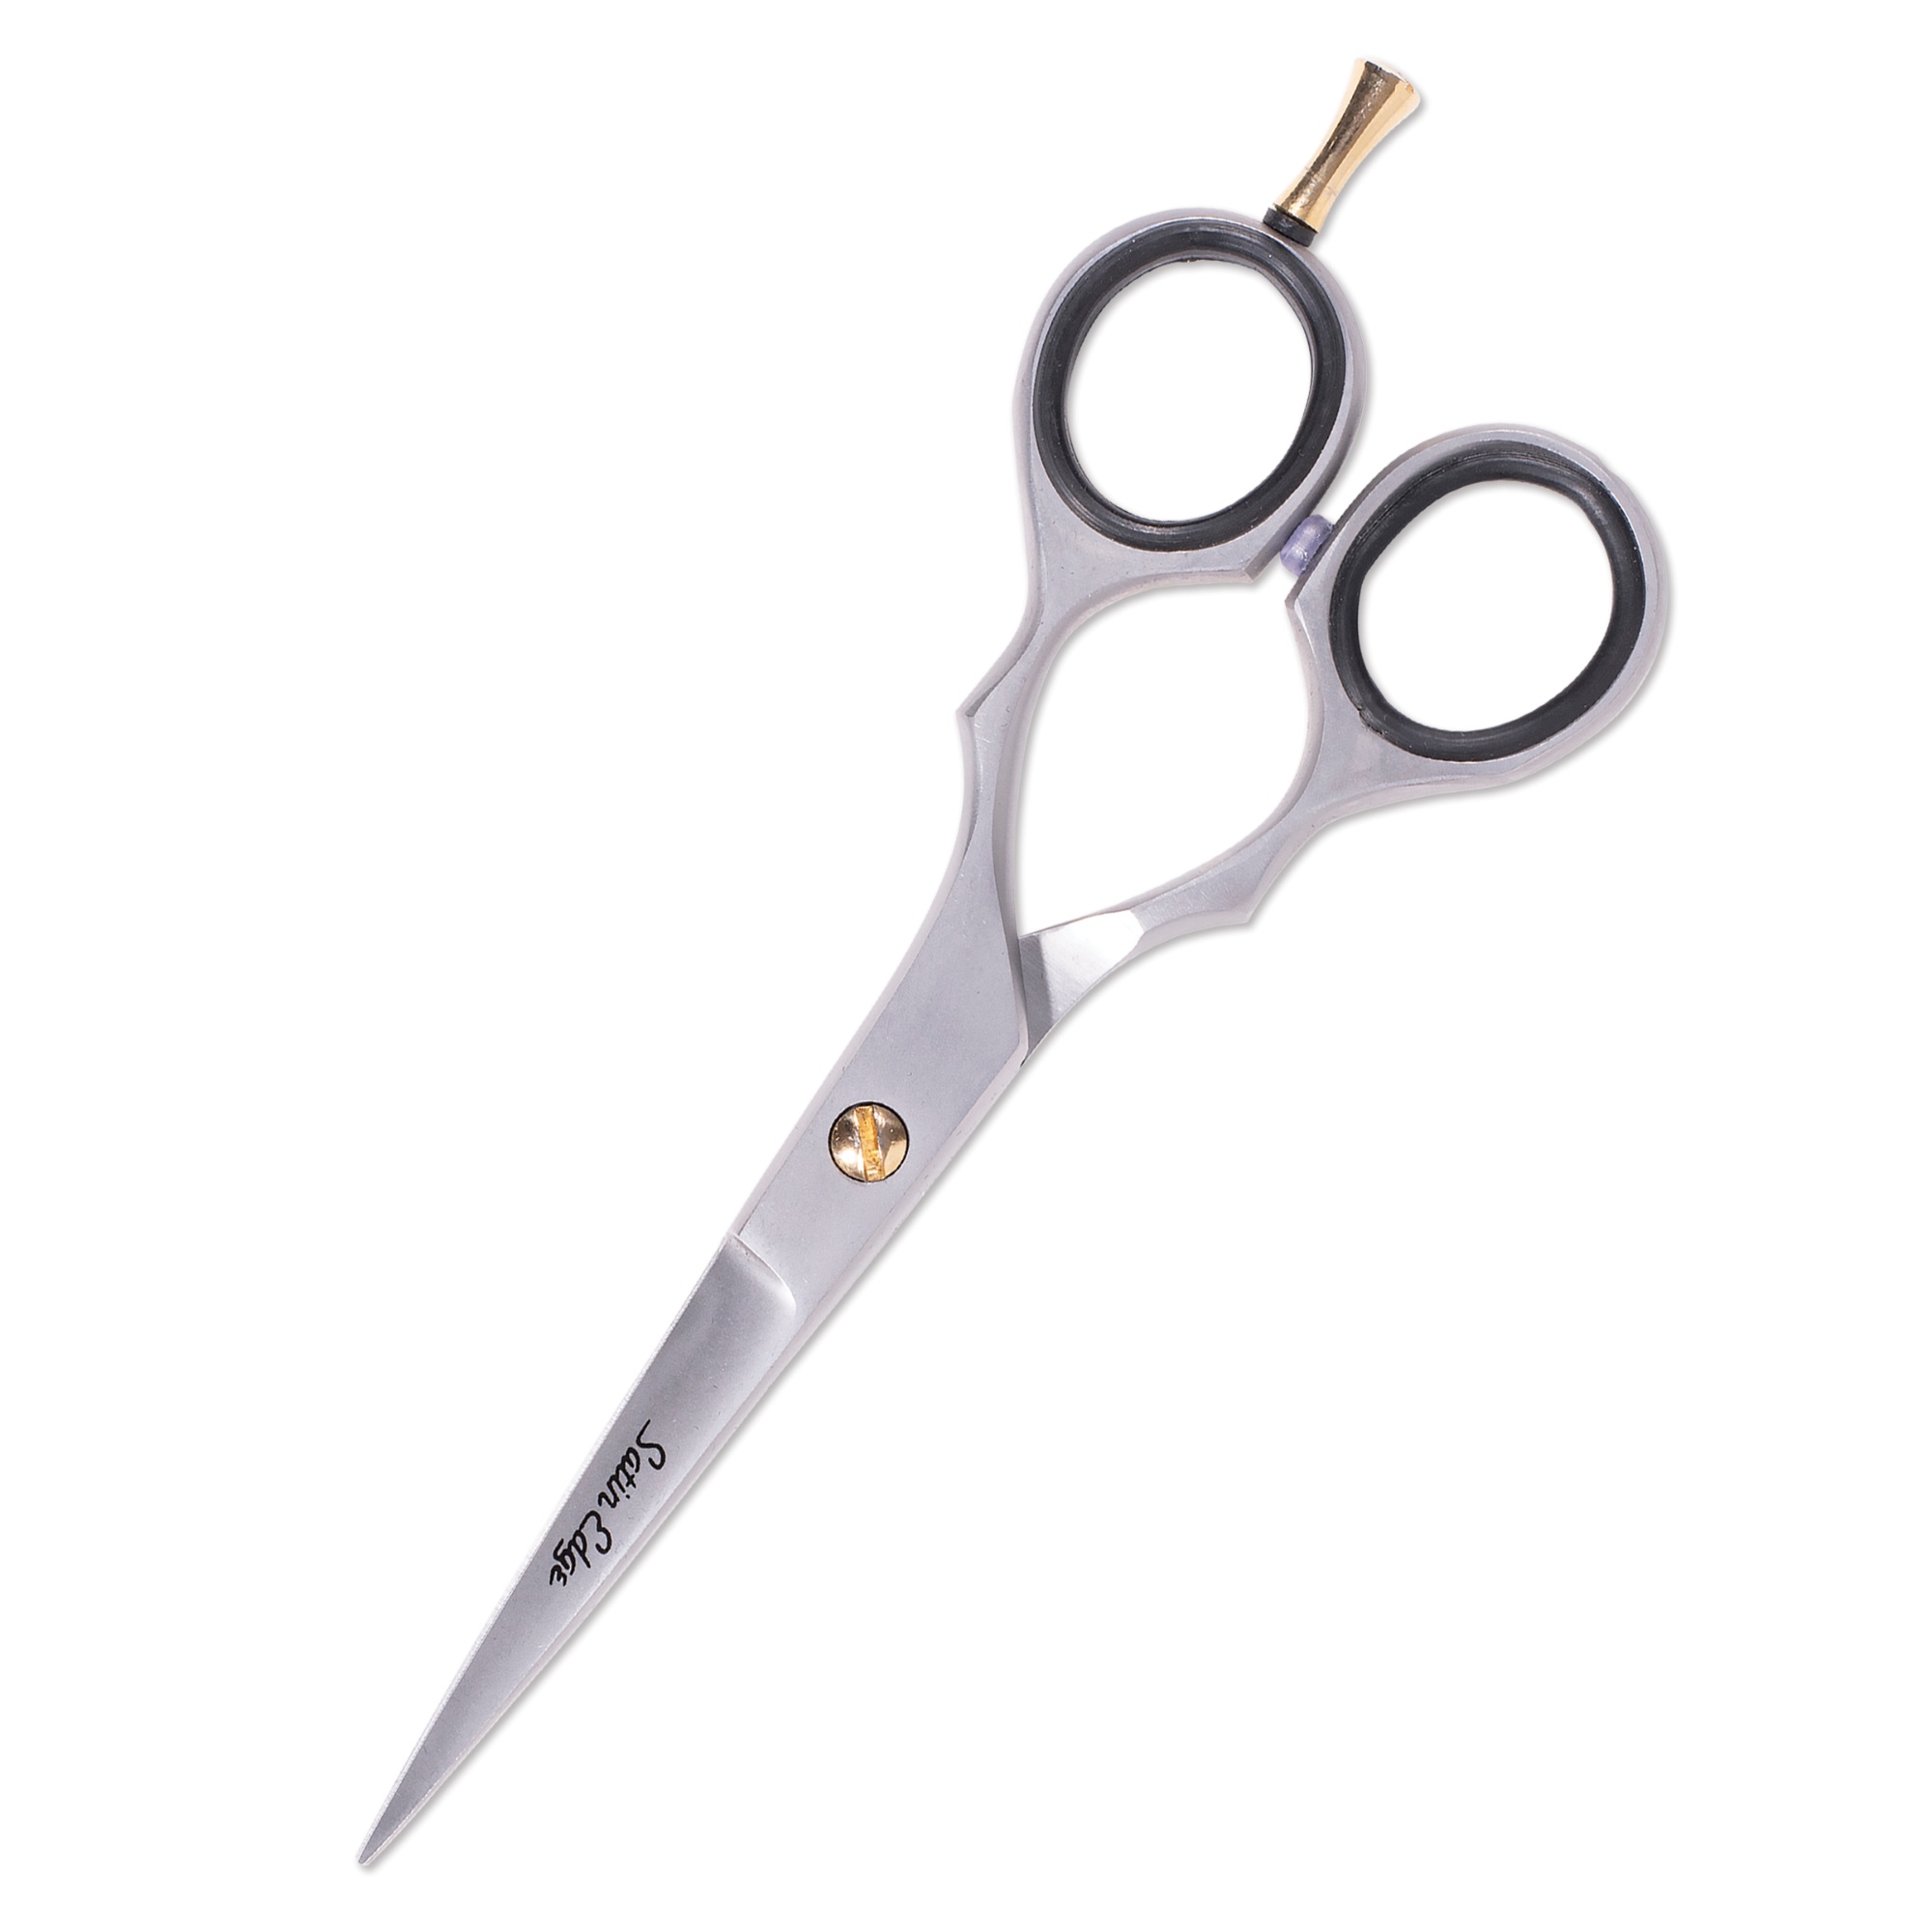 5-1/2" Premier Stainless Steel Cutting Shear